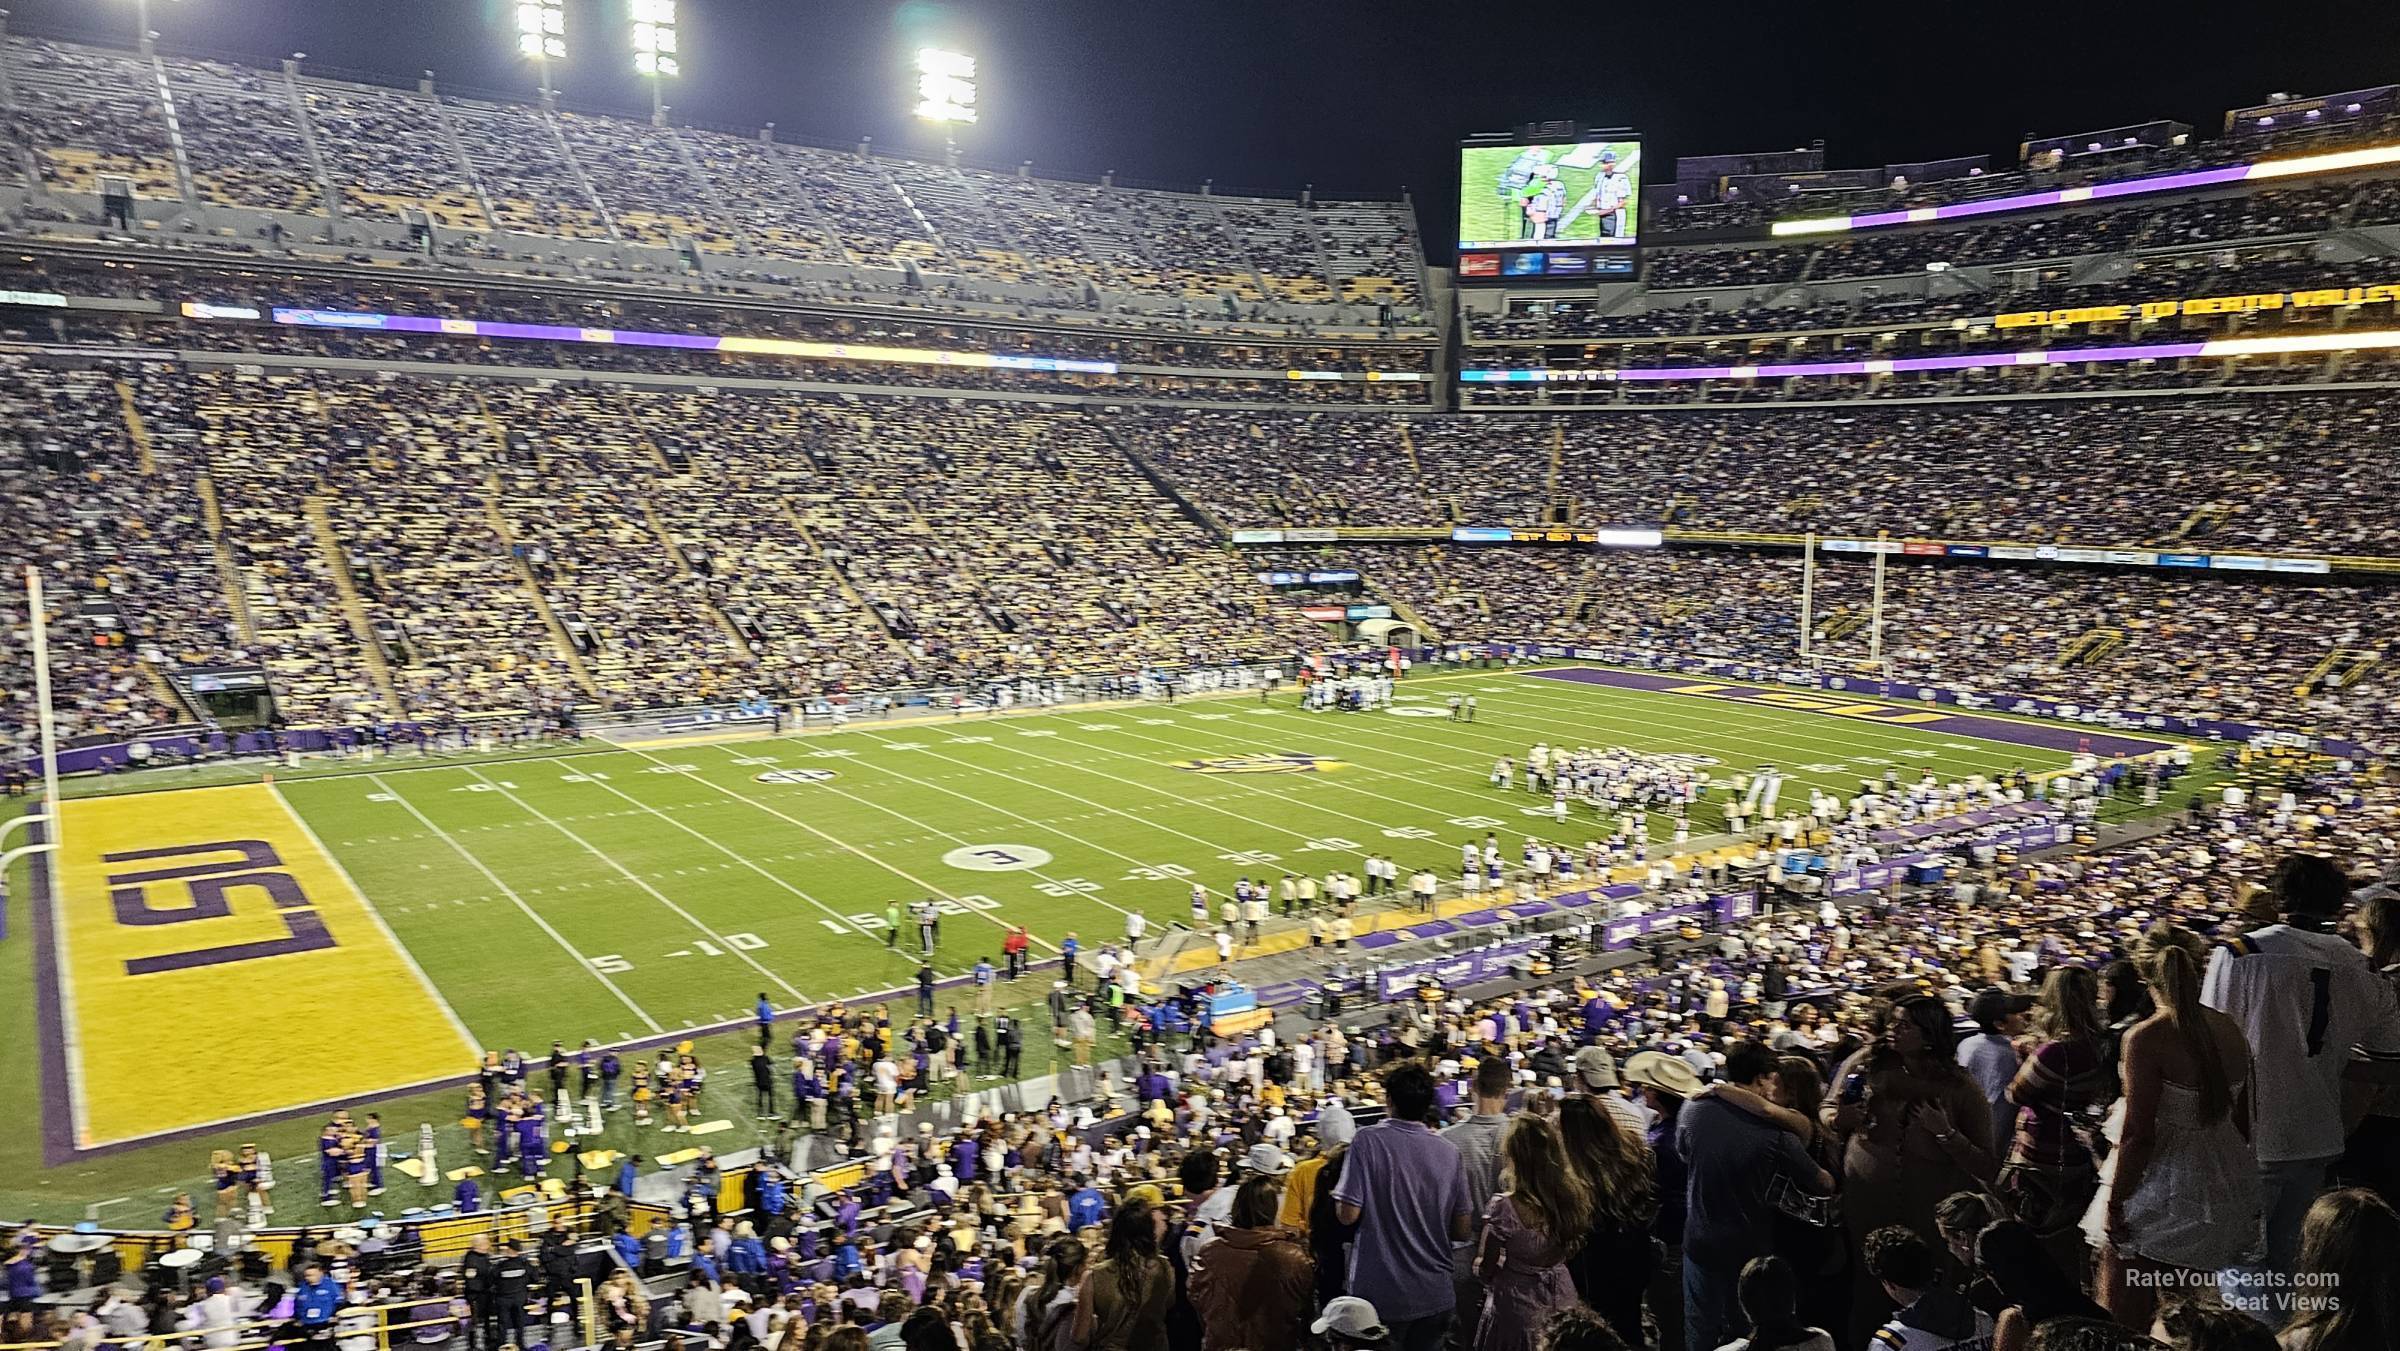 section 223, row 1 seat view  - tiger stadium